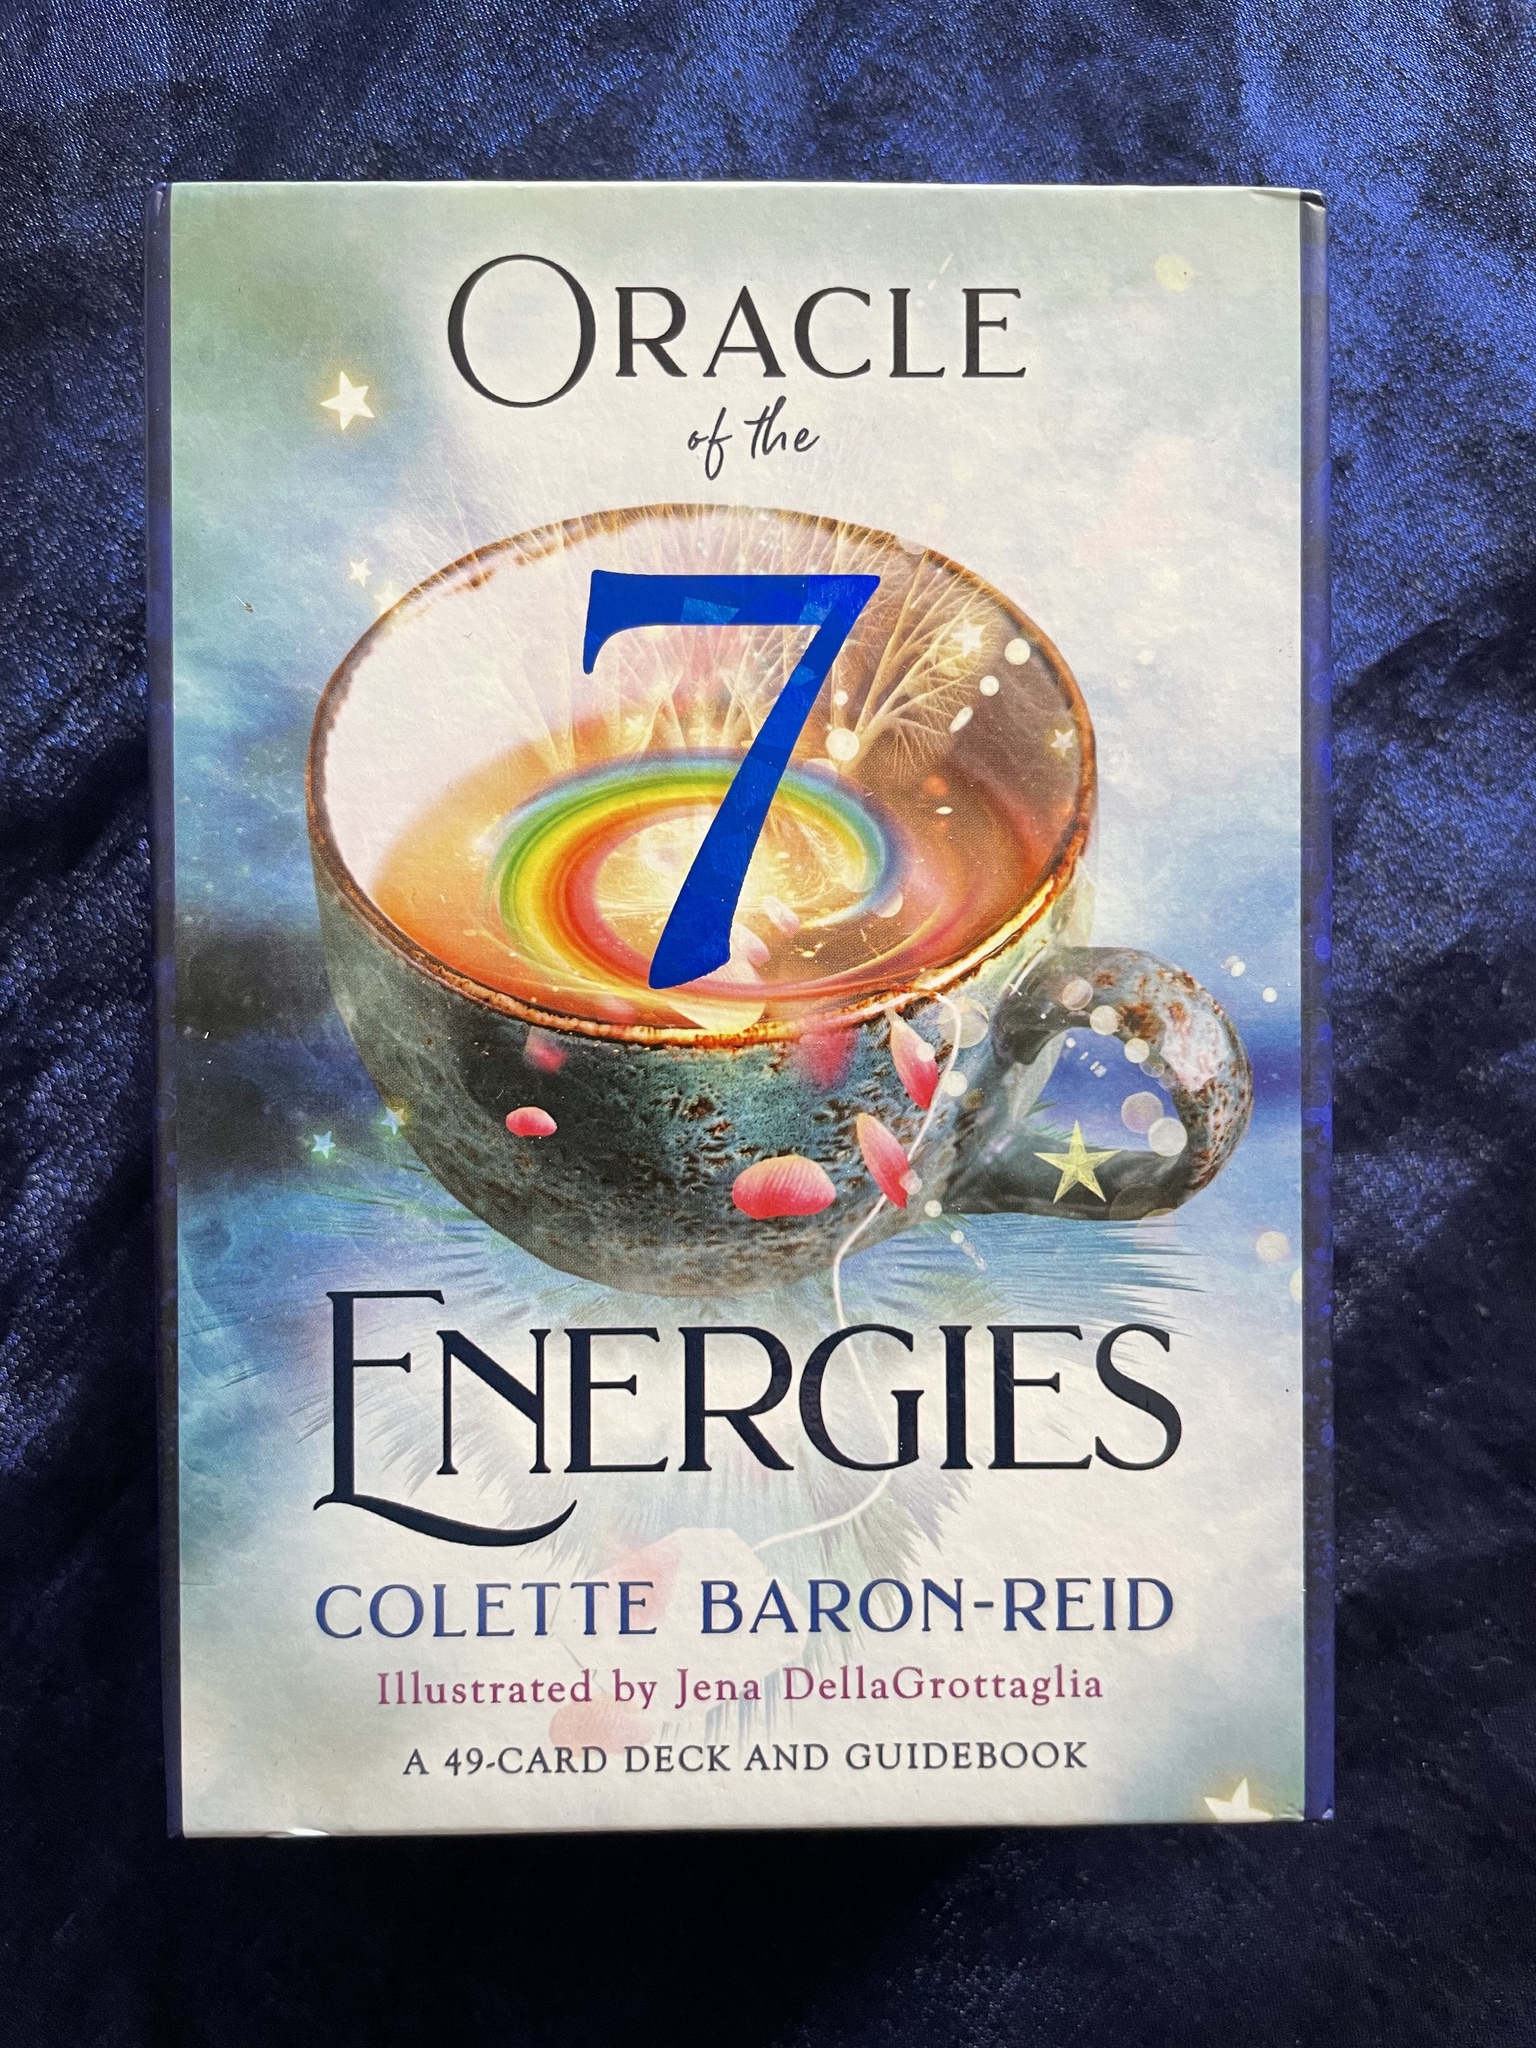 Oracle of the 7 energies (eng text)